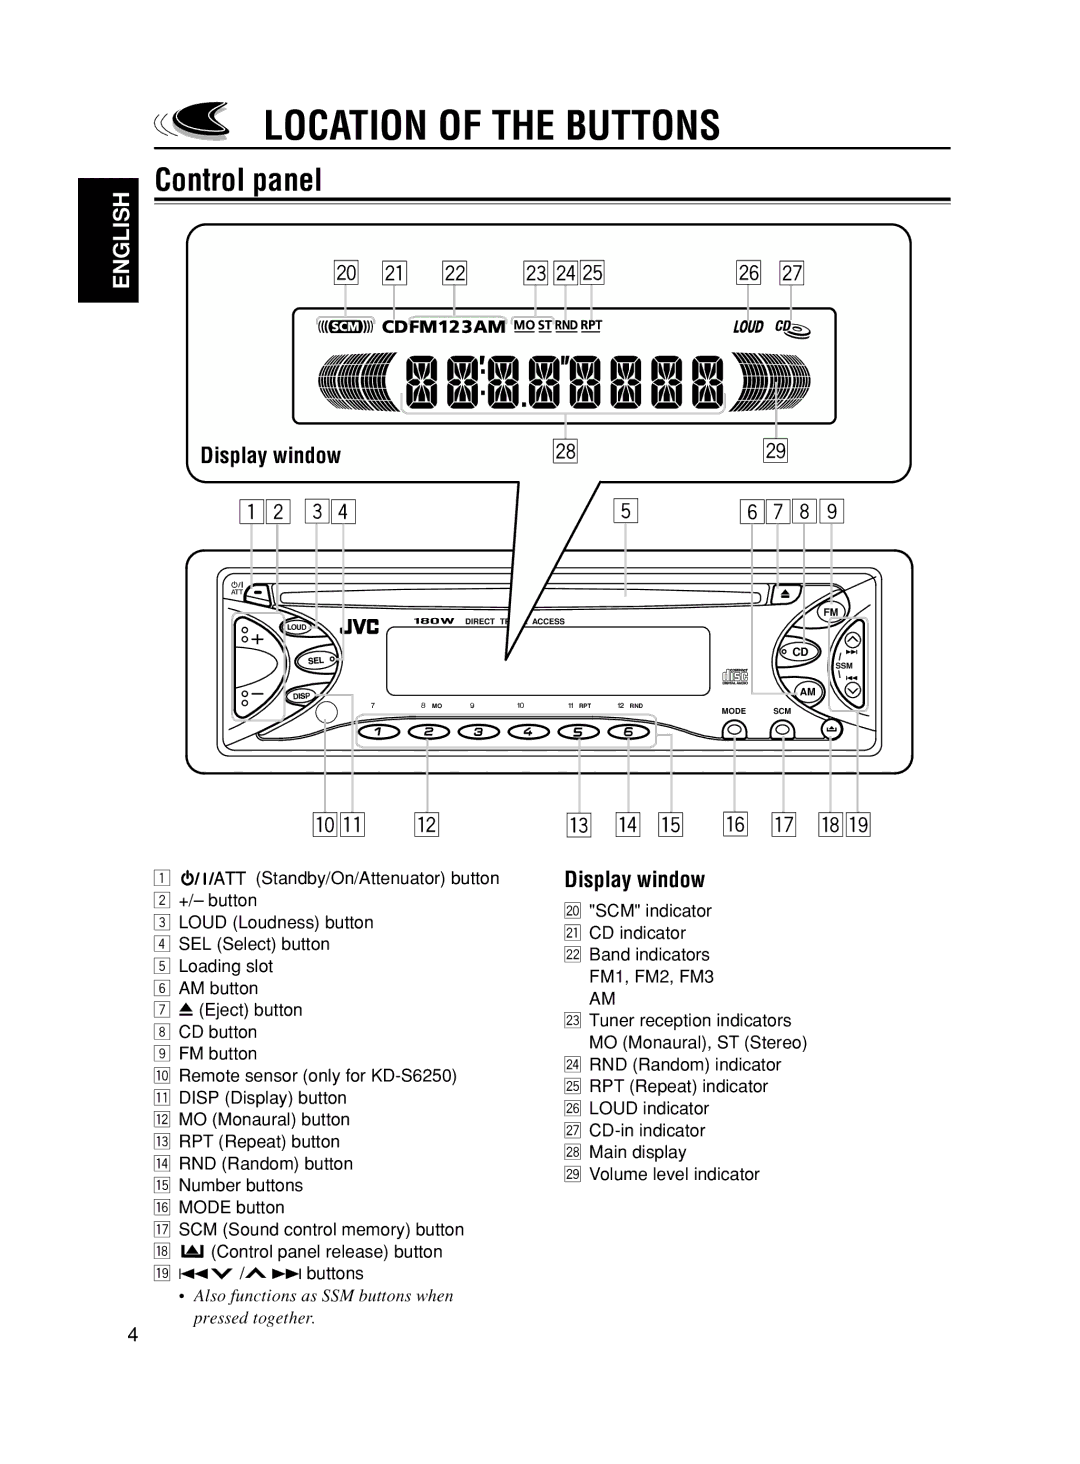 JVC KD-S580 manual Location of the Buttons, Control panel, Display window 